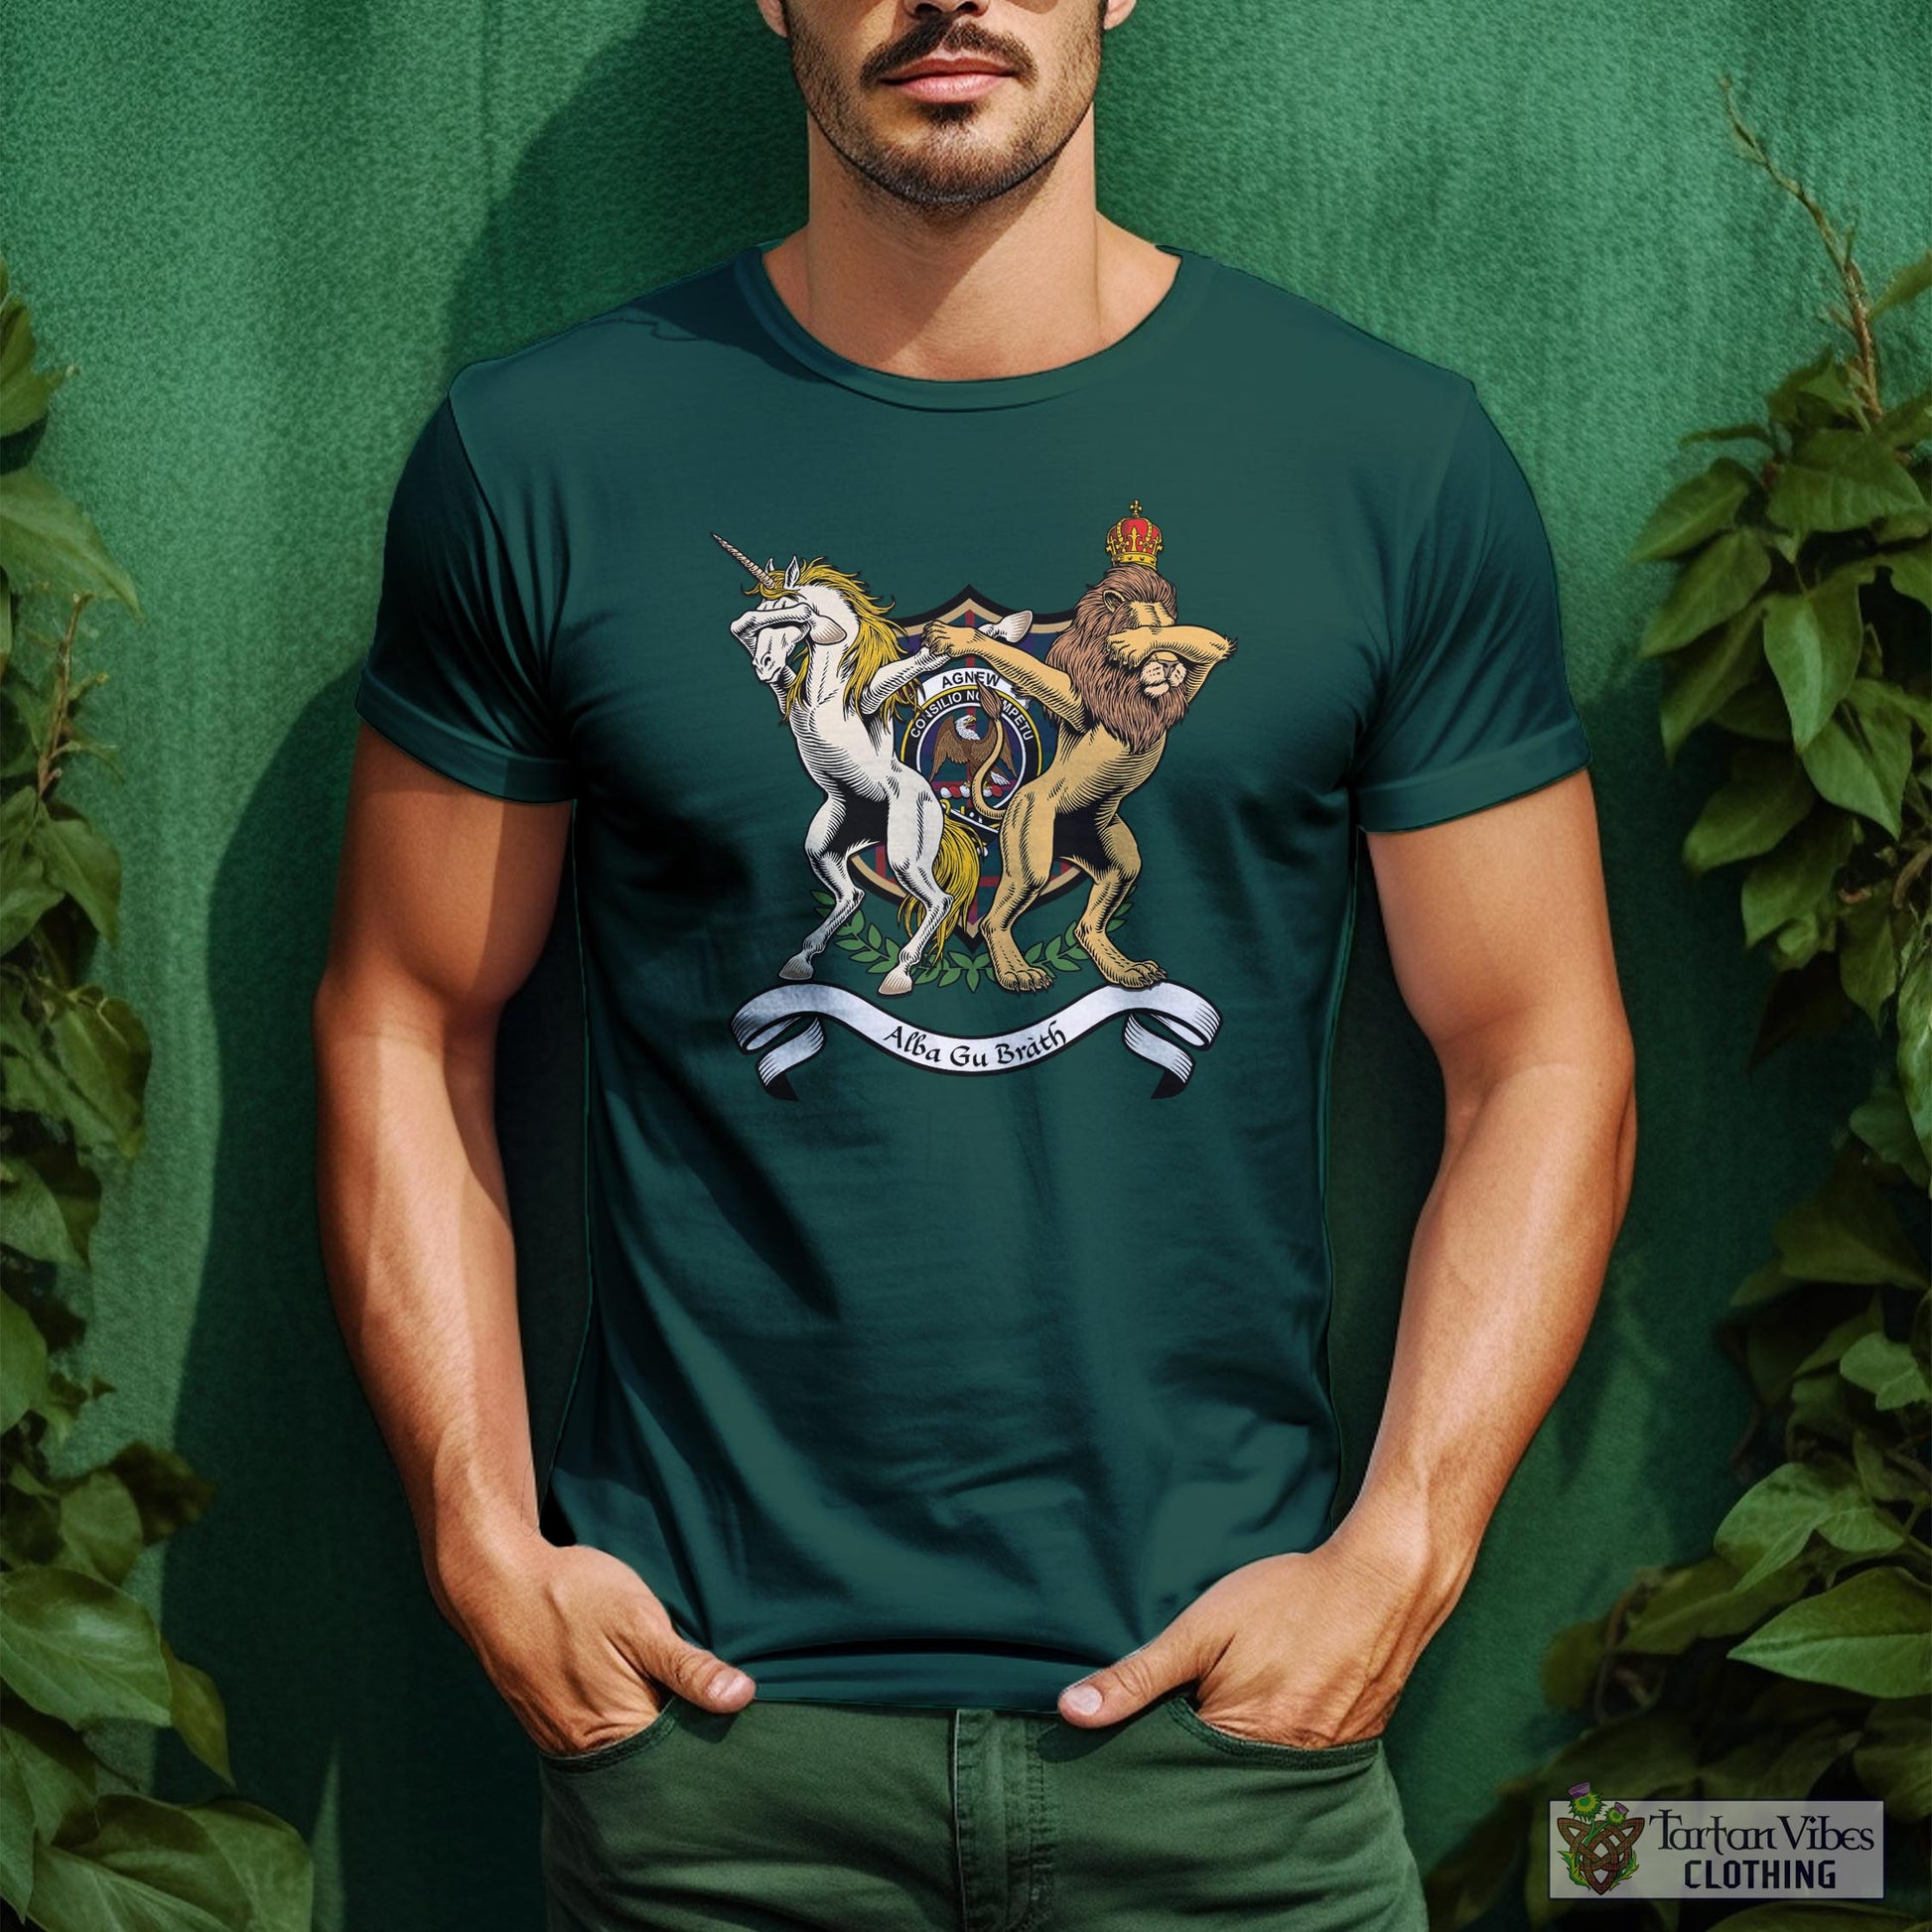 Tartan Vibes Clothing Agnew Modern Family Crest Cotton Men's T-Shirt with Scotland Royal Coat Of Arm Funny Style